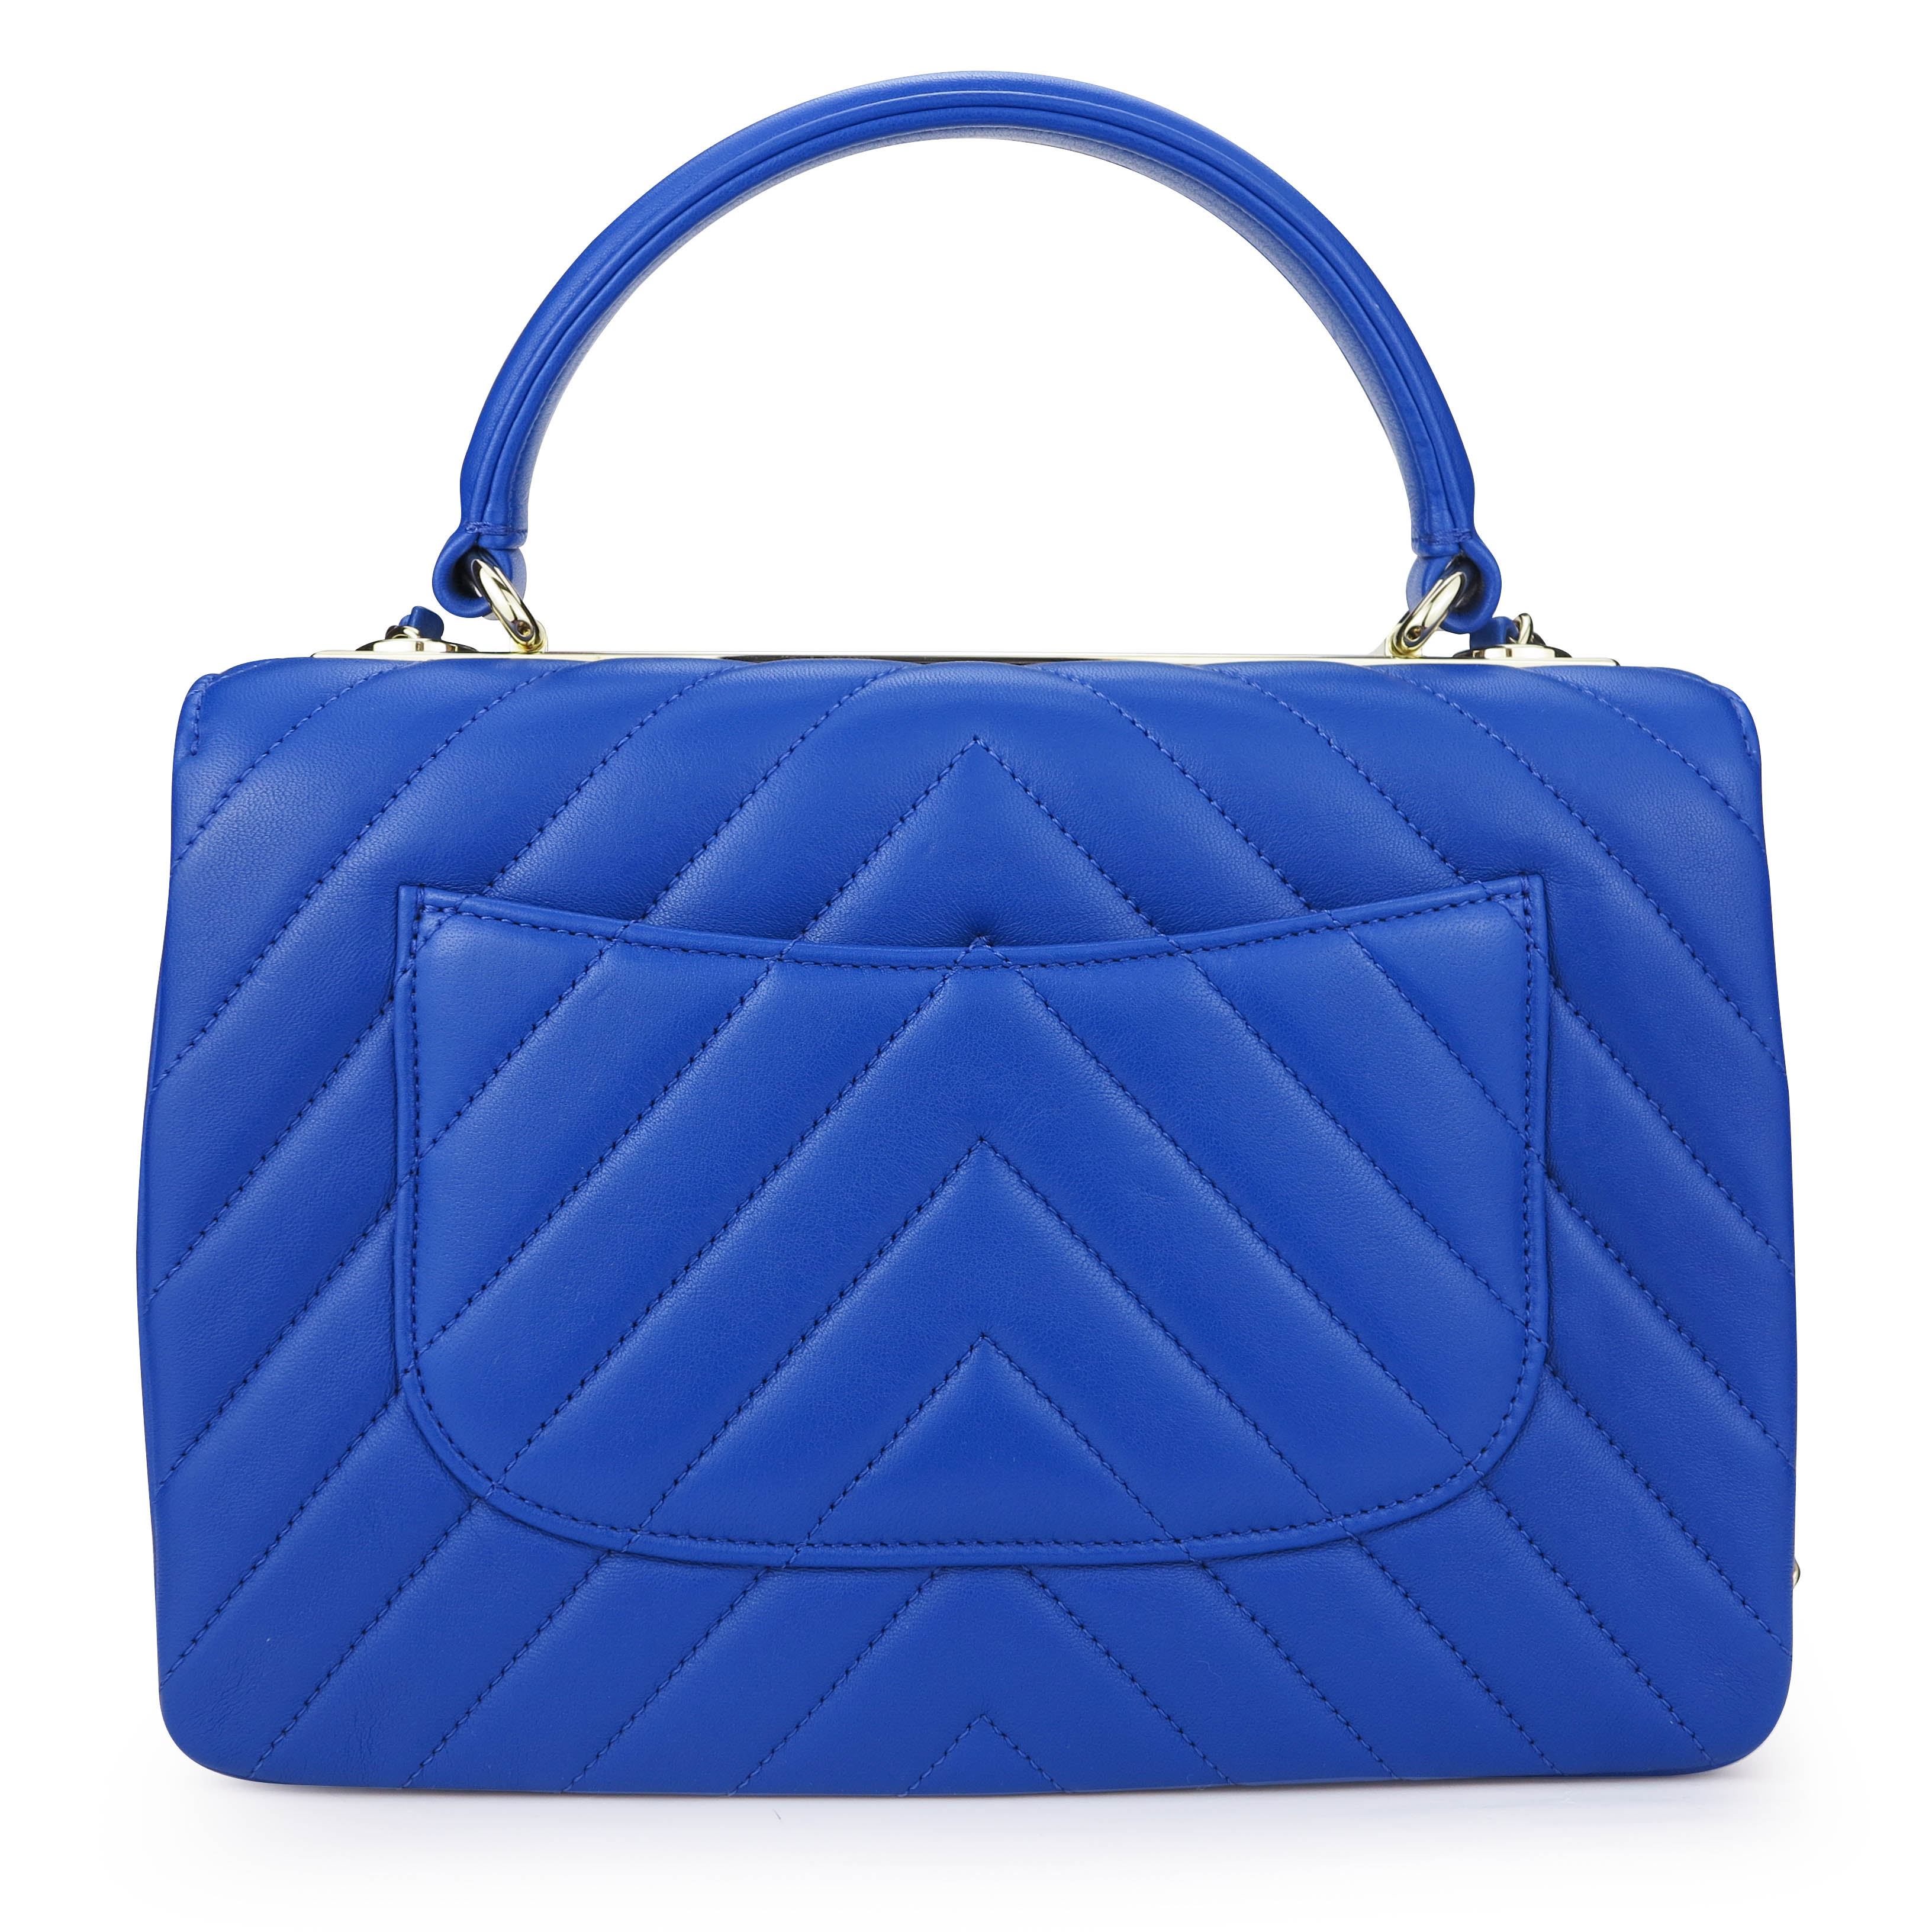 Small Trendy CC Flap Bag with Top Handle in Chevron Blue Lambskin